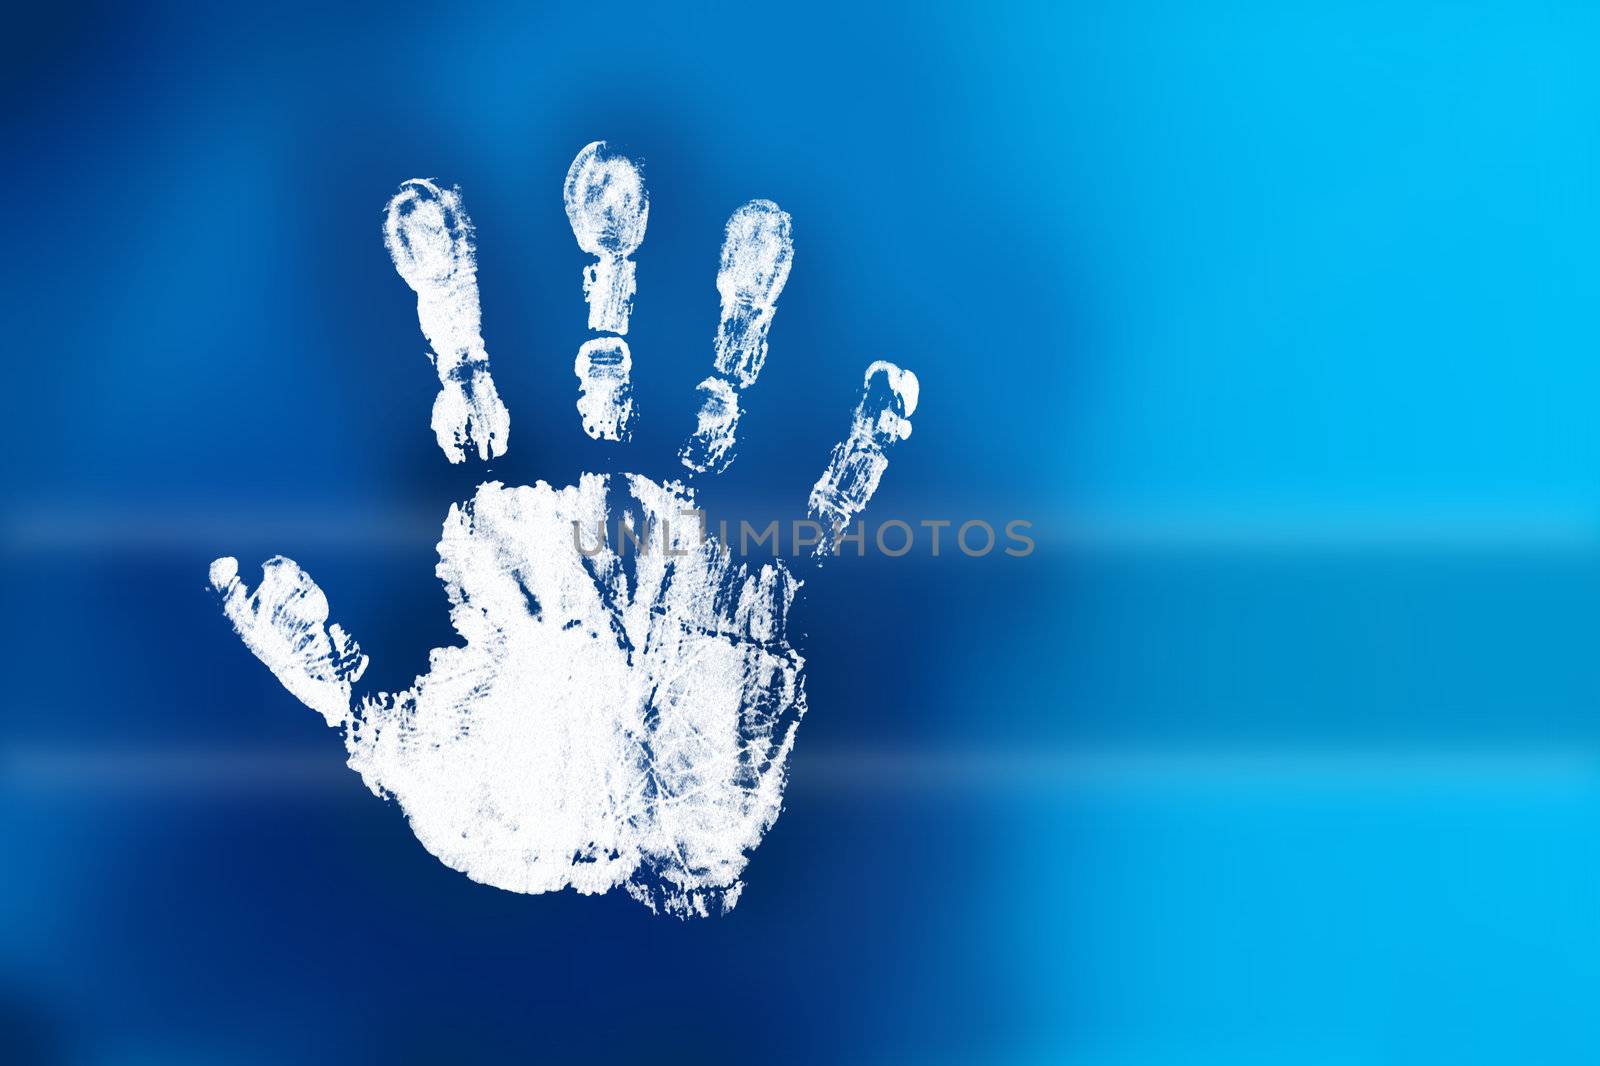 colored handprint on a white background